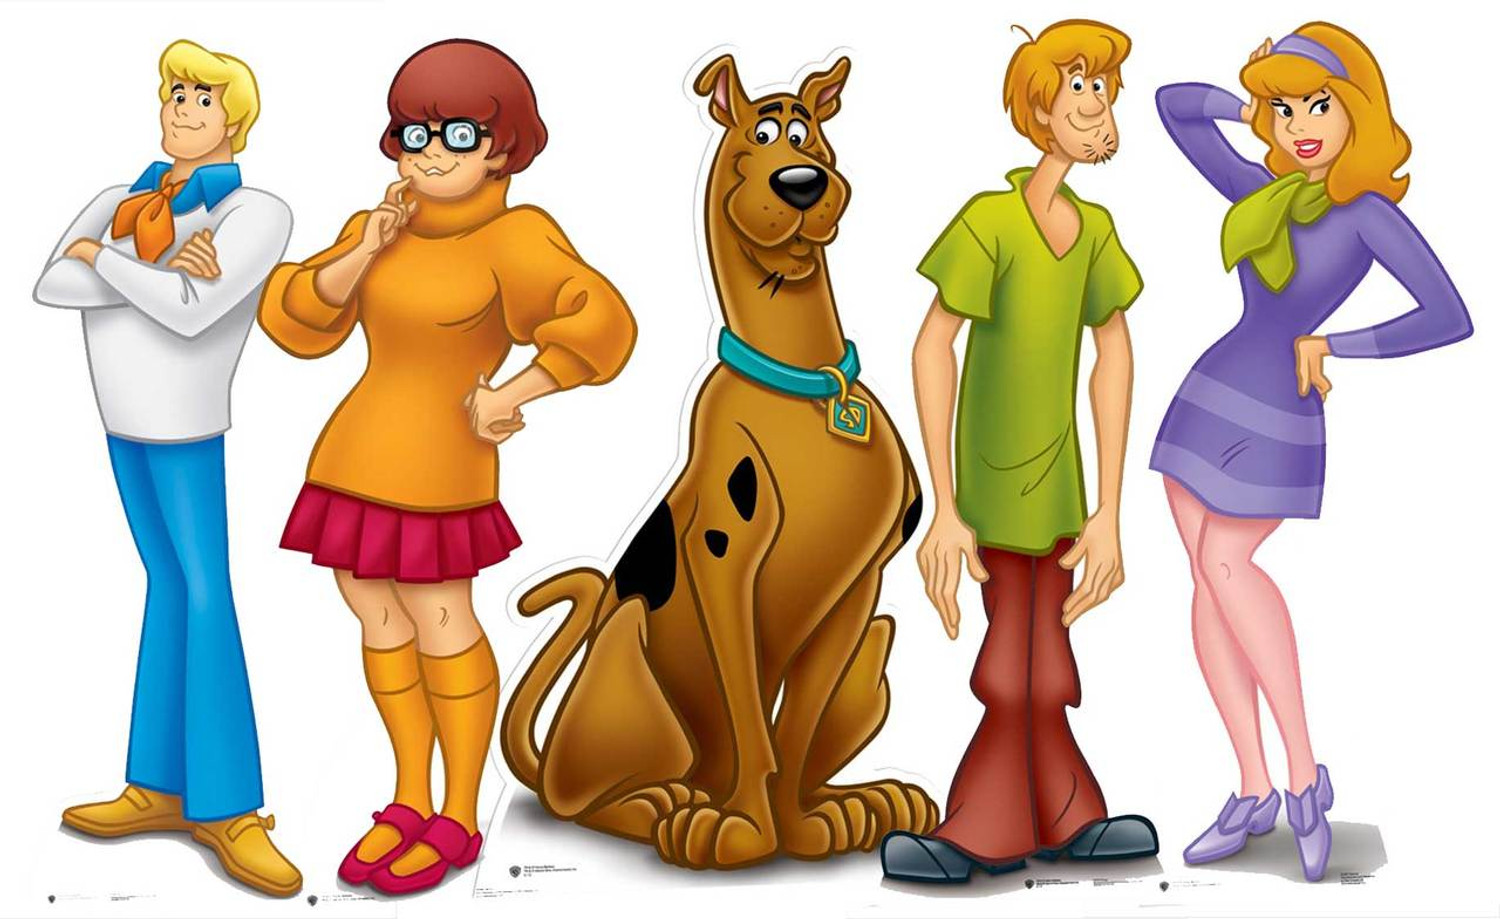 Scooby-Doo and The Mystery Team Cardboard Cutout / Standee Set